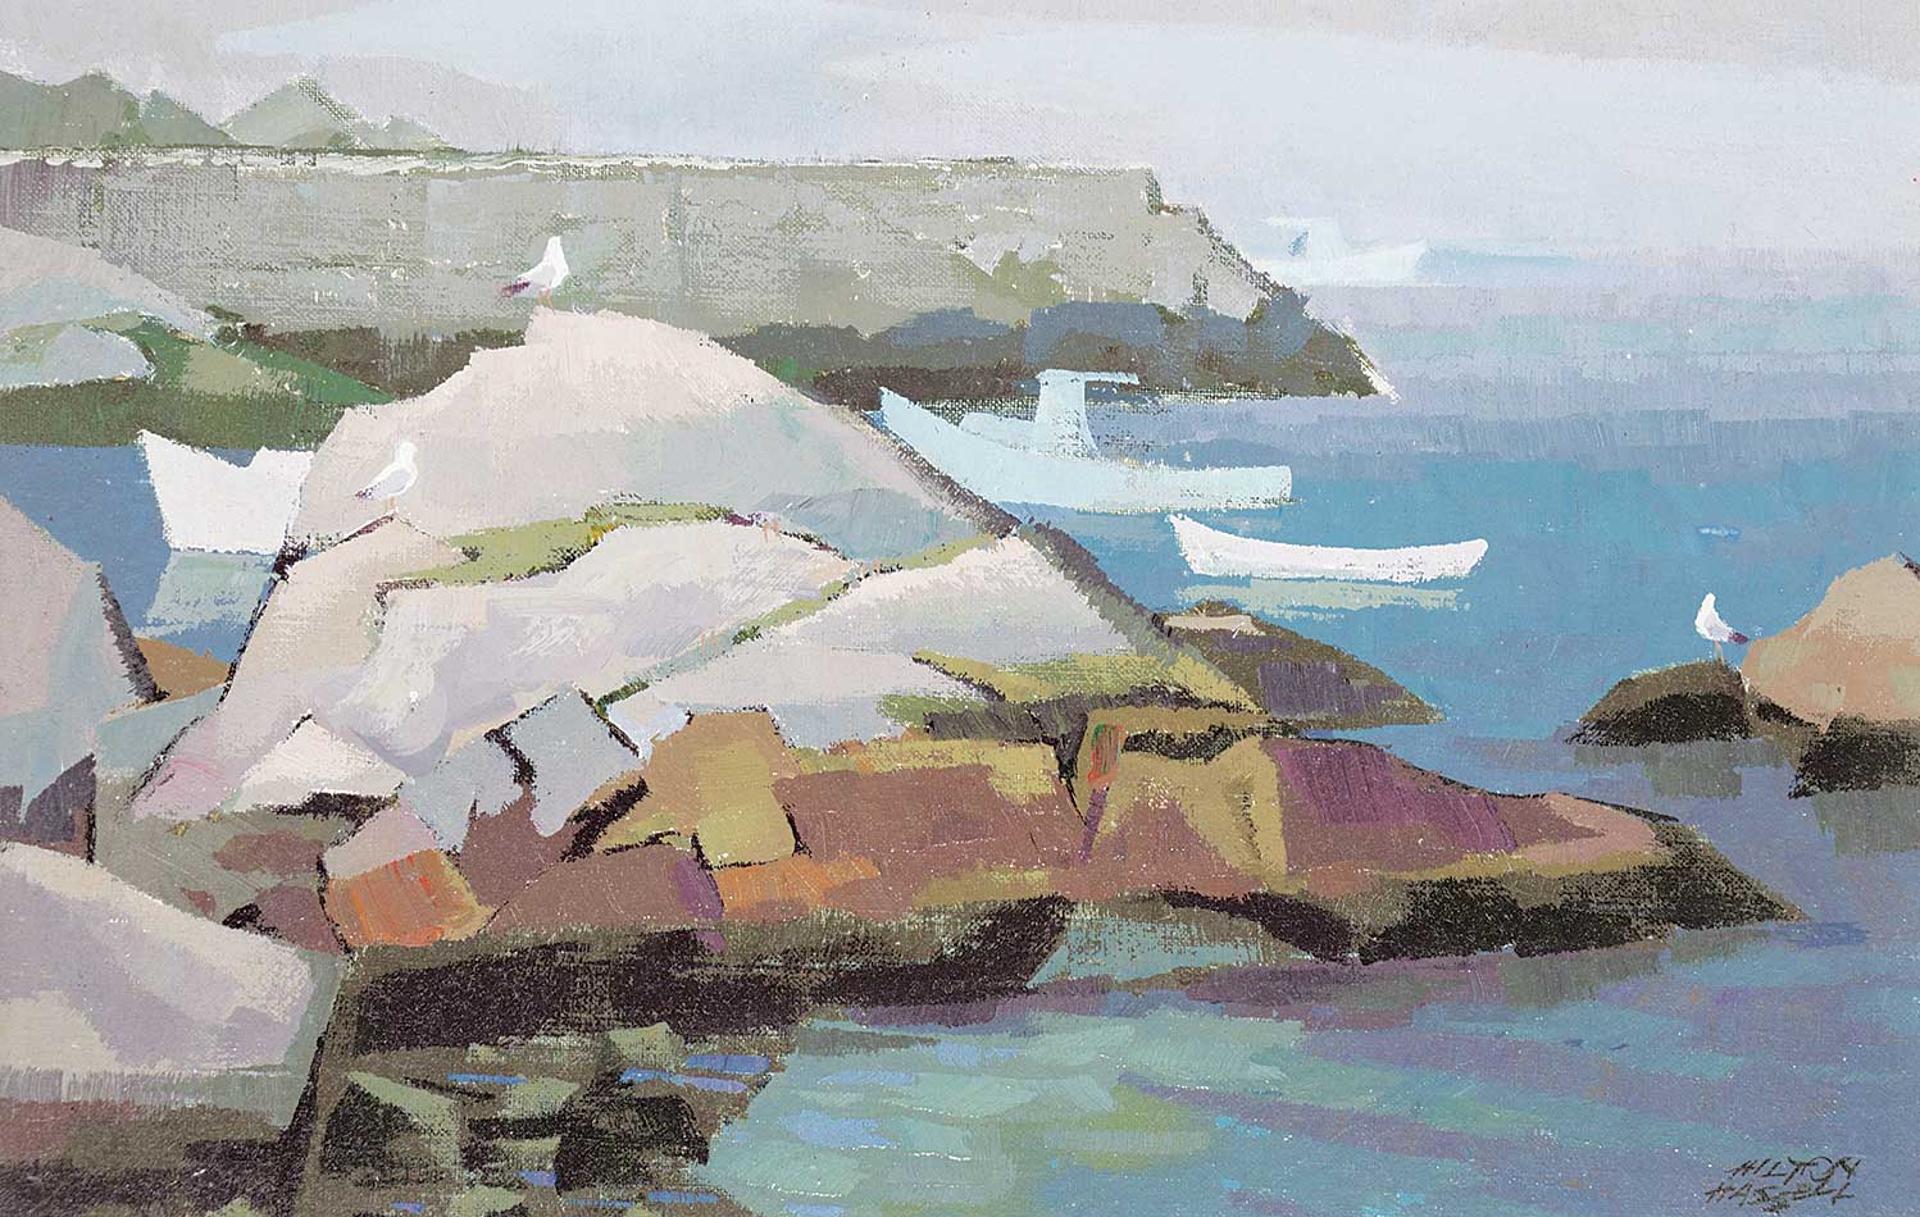 Hilton MacDonald Hassell (1910-1980) - Rocks and Gulls, Middle Point Cove N.S.